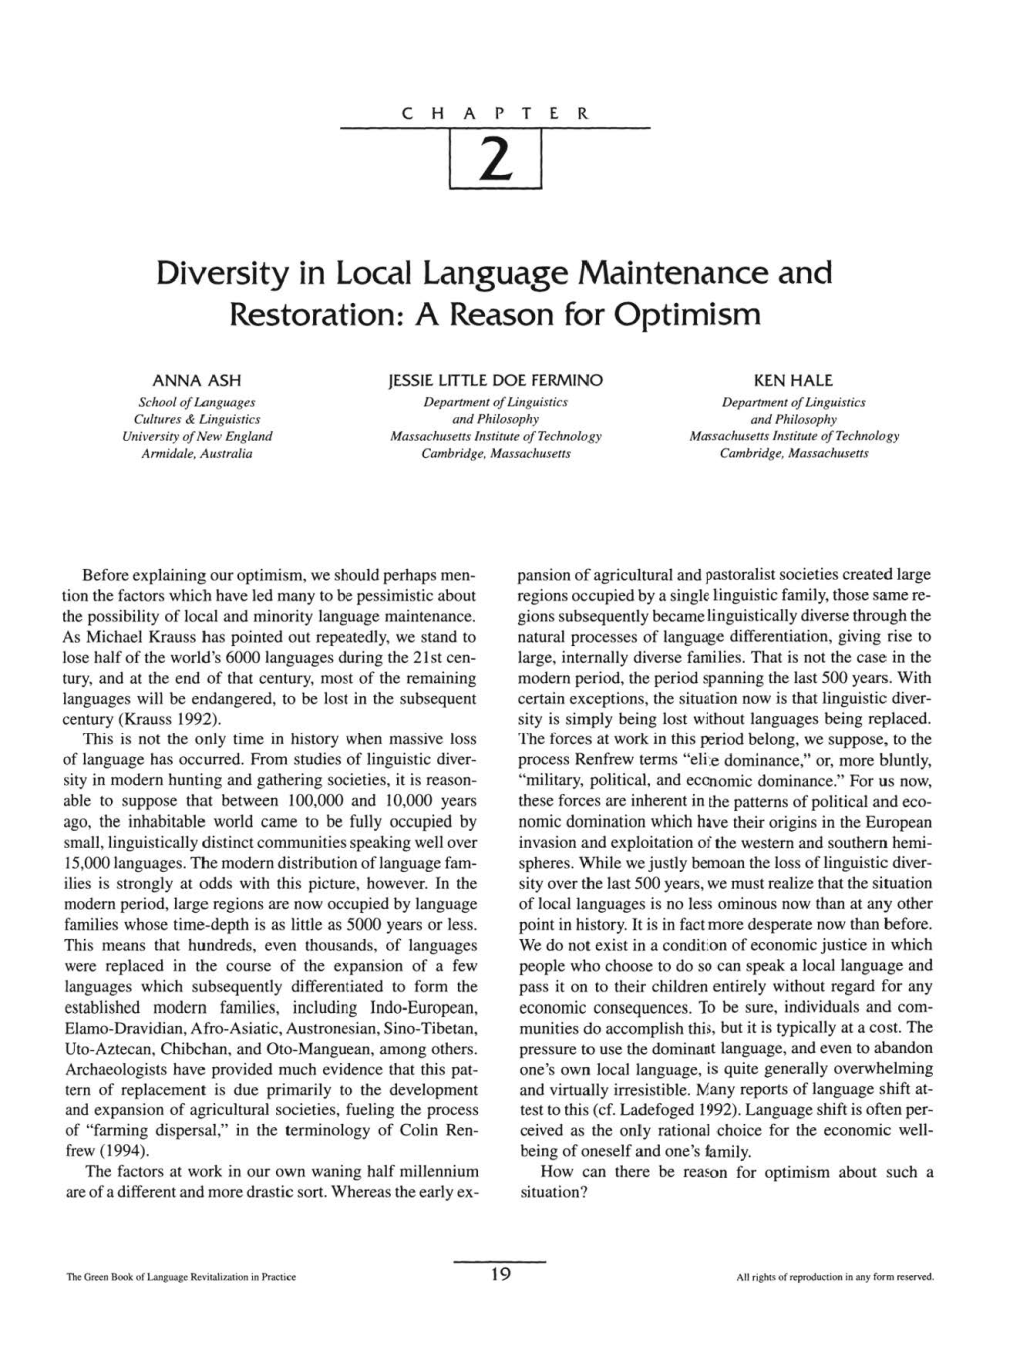 Diversity in Local Language Maintenance and Restoration: a Reason for Optimism